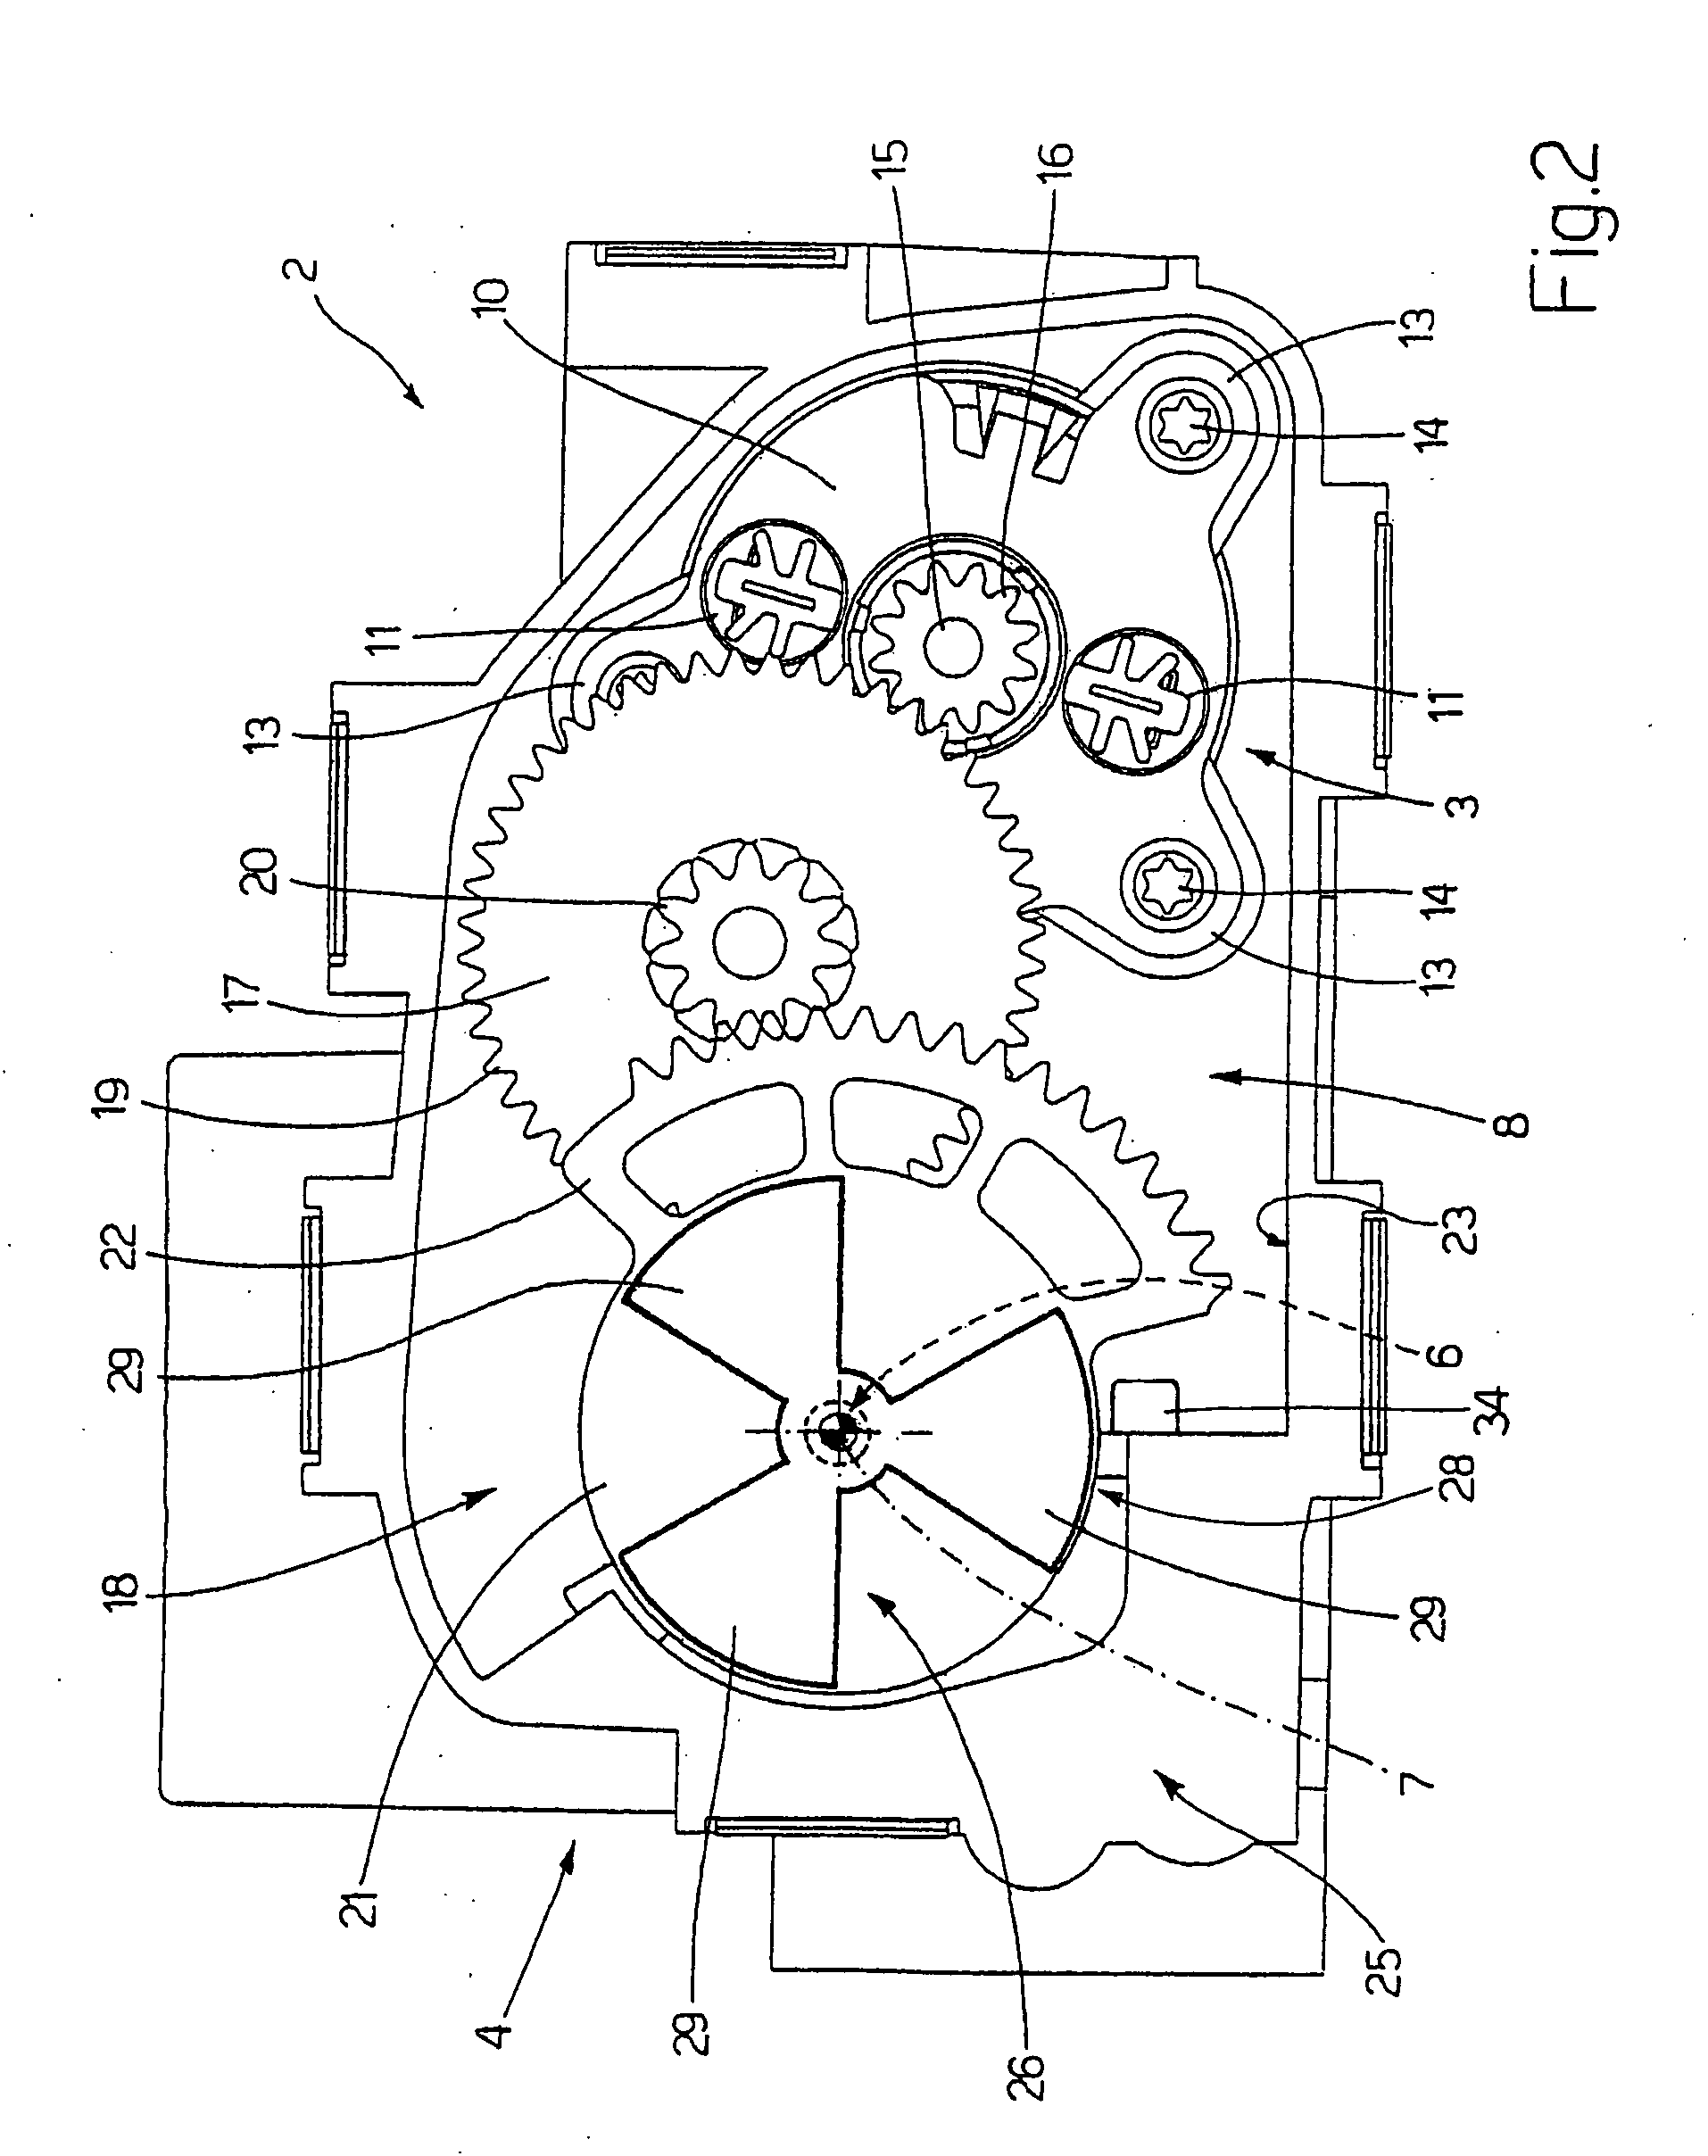 Method for controlling an electric motor by using the PWM Technique